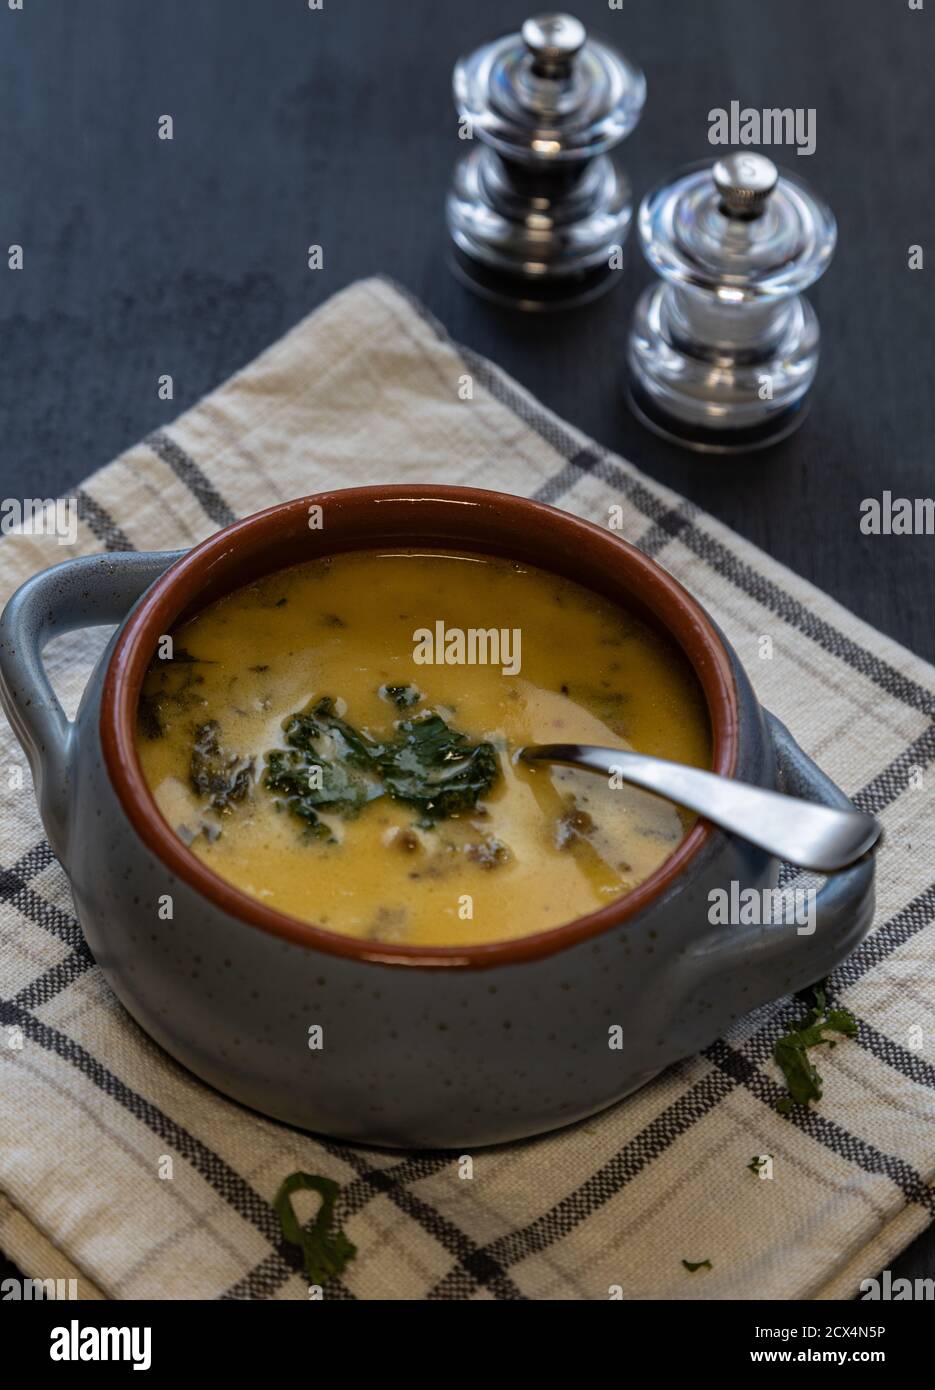 High angle shot of a potato, sausage and kale soup in a blue and orange bowl on a dish towel against a dark blue background. Stock Photo